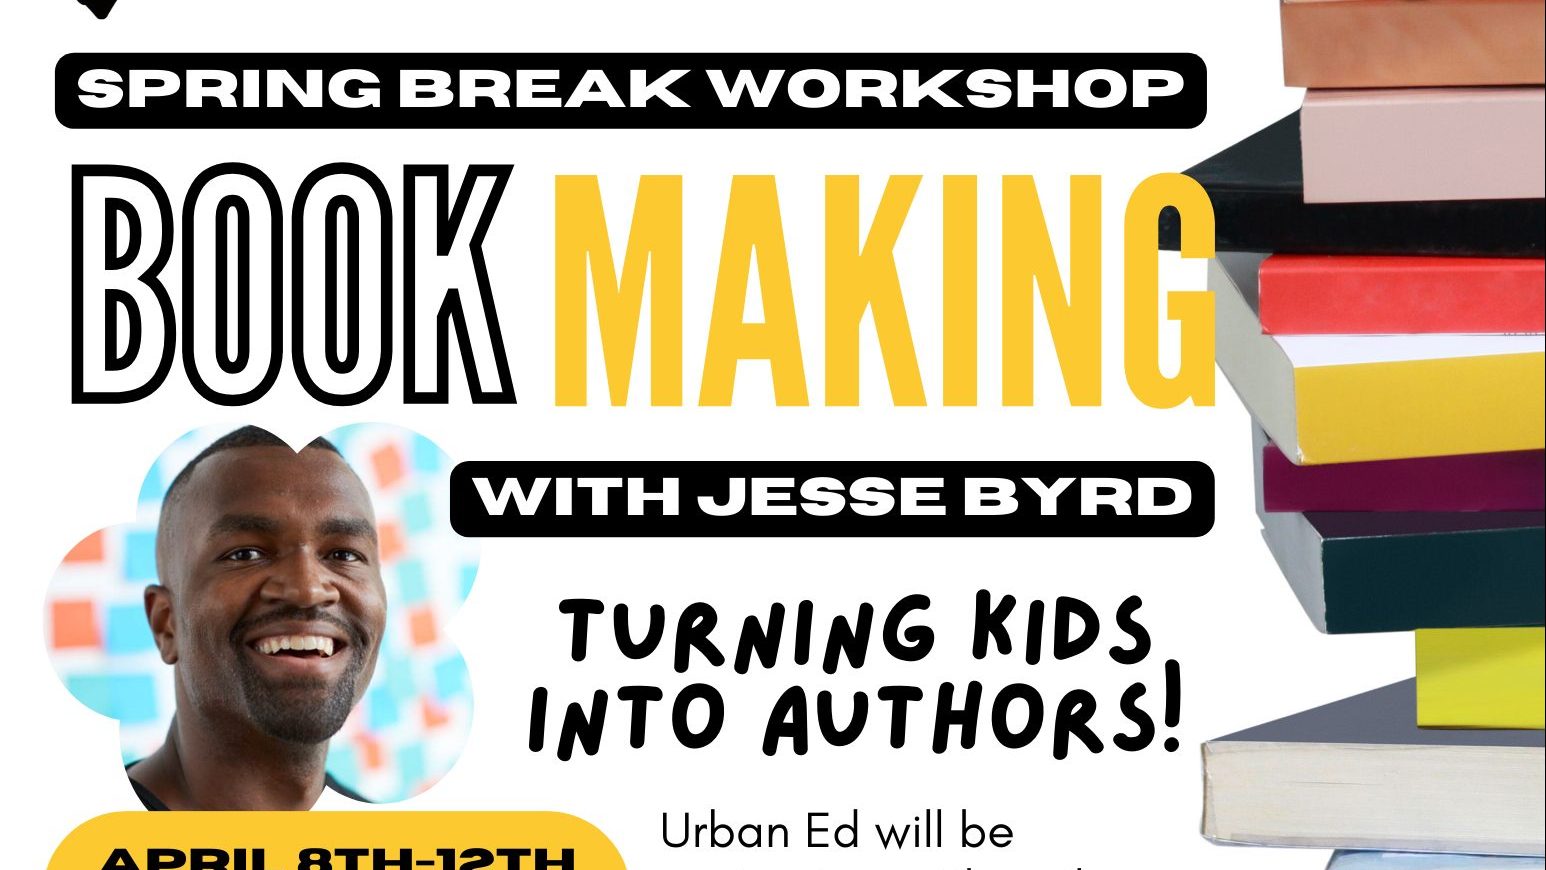 Spring Break Book Series Workshop for SF Middle School Youth